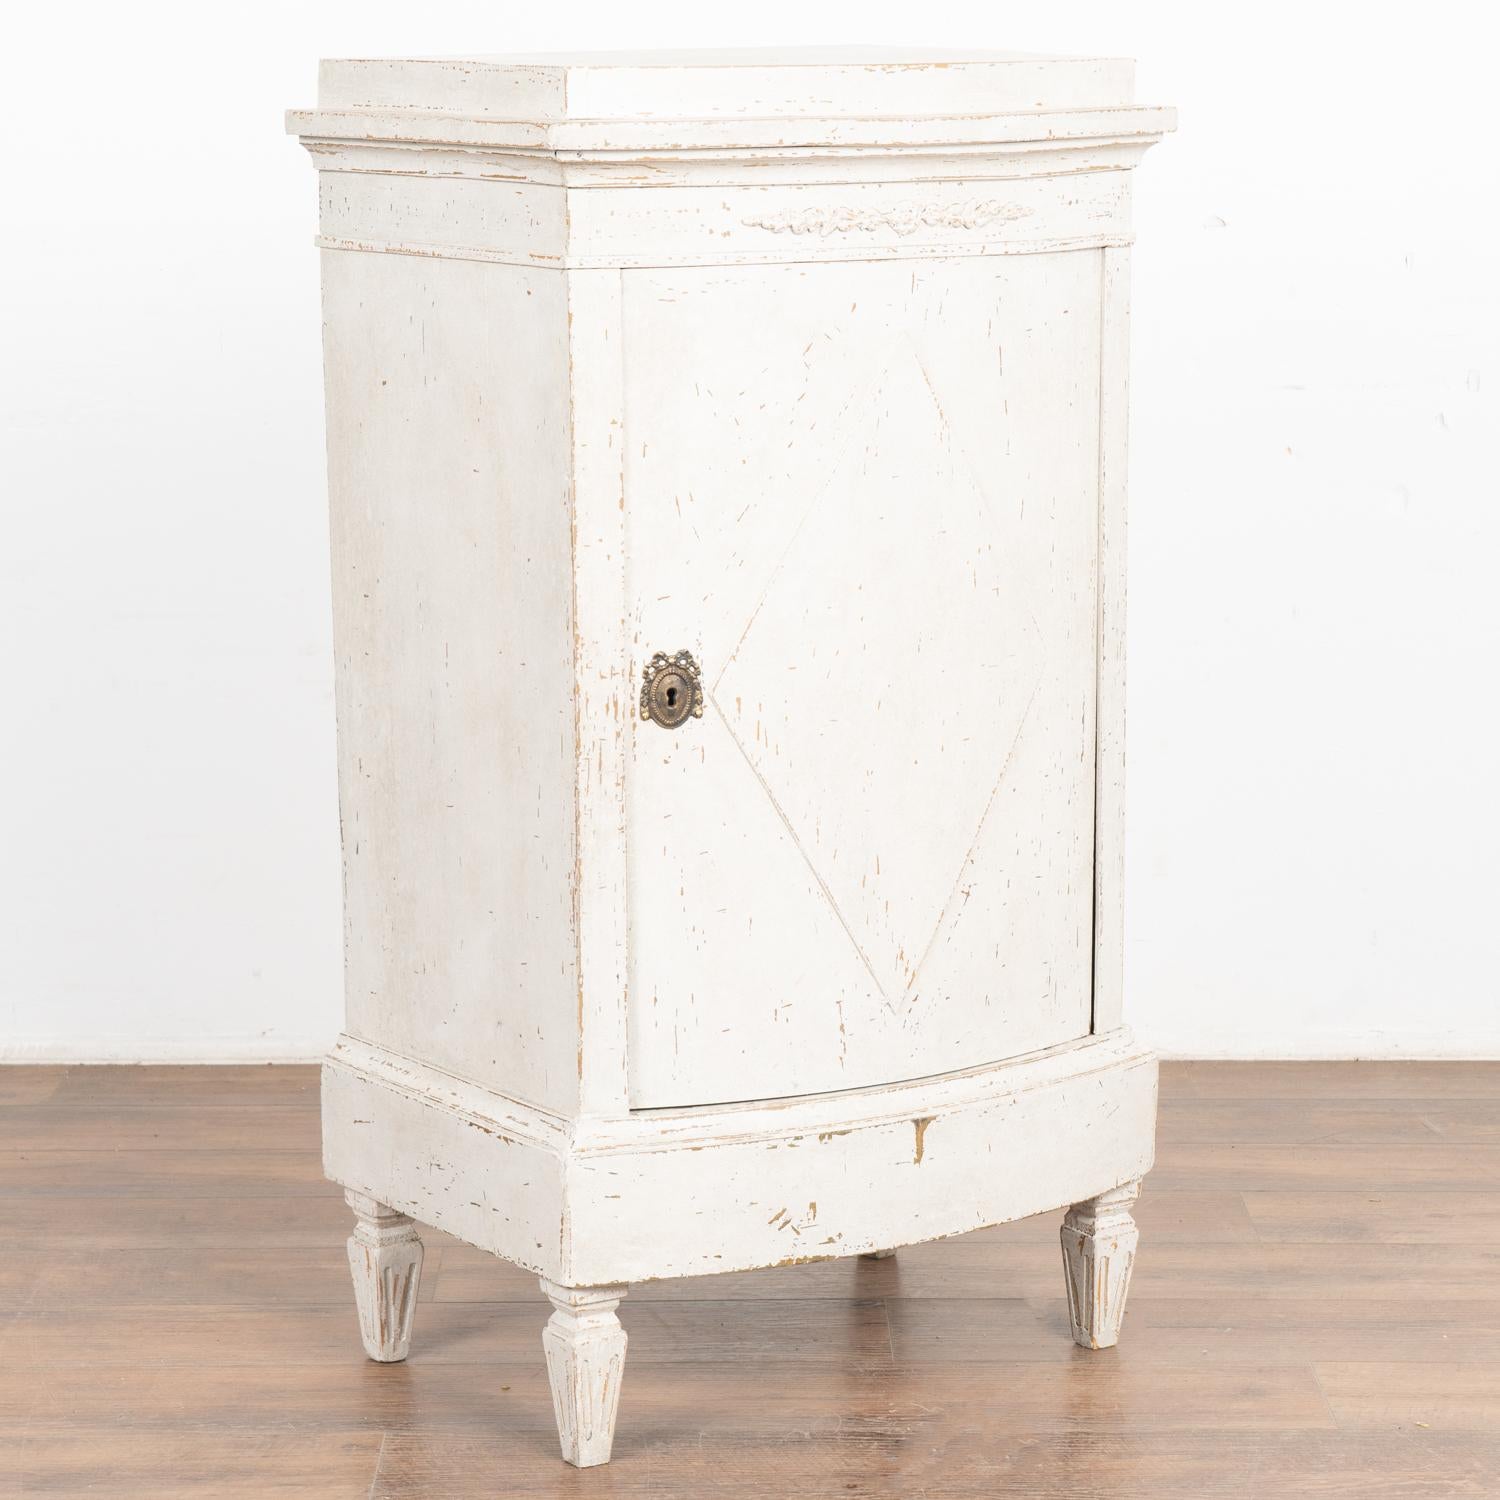 Lovely Swedish country white painted bow front small cabinet standing on fluted tapered feet.
Traditional diamond motif on single panel door which opens to reveal two internal shelves.
Newer professionally applied antique white painted finish gently